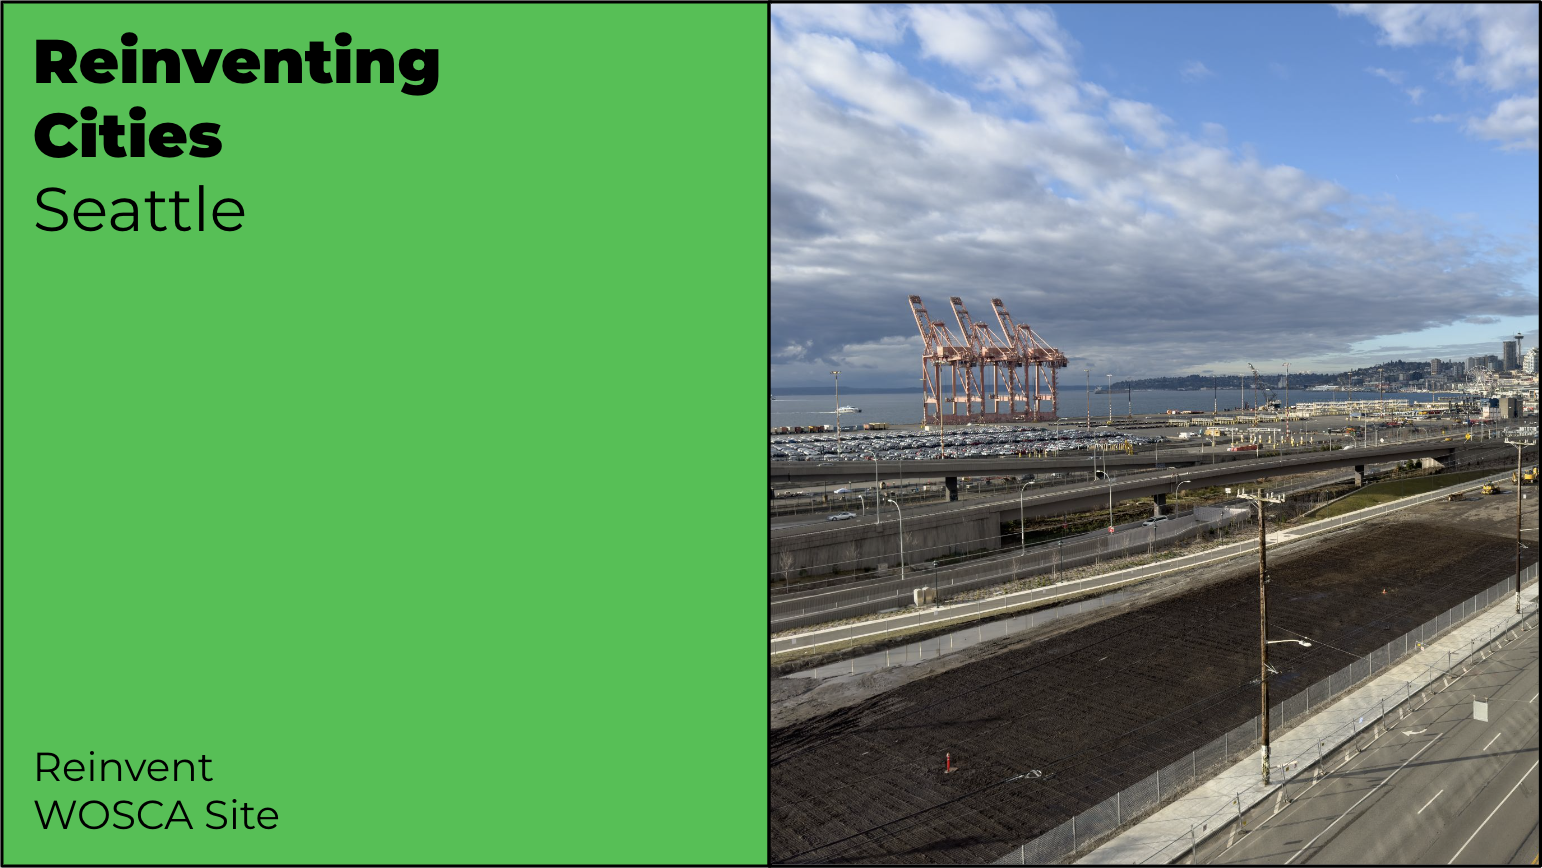 A graphic showing an example of the Washington and Oregon Shippers Cooperative Association (WOSCA) site planned for re-development. The left side of the graphic says "Reinventing Cities Seattle" and "Reinvent WOSCA Site" with a green background behind it. On the right hand side of the graphic is a photo of the WOSCA site, a long, narrow plot of land that has nothing but dirt on it. In the background is Puget Sound, container cranes, and a blue sky with white and gray clouds on a sunny day.